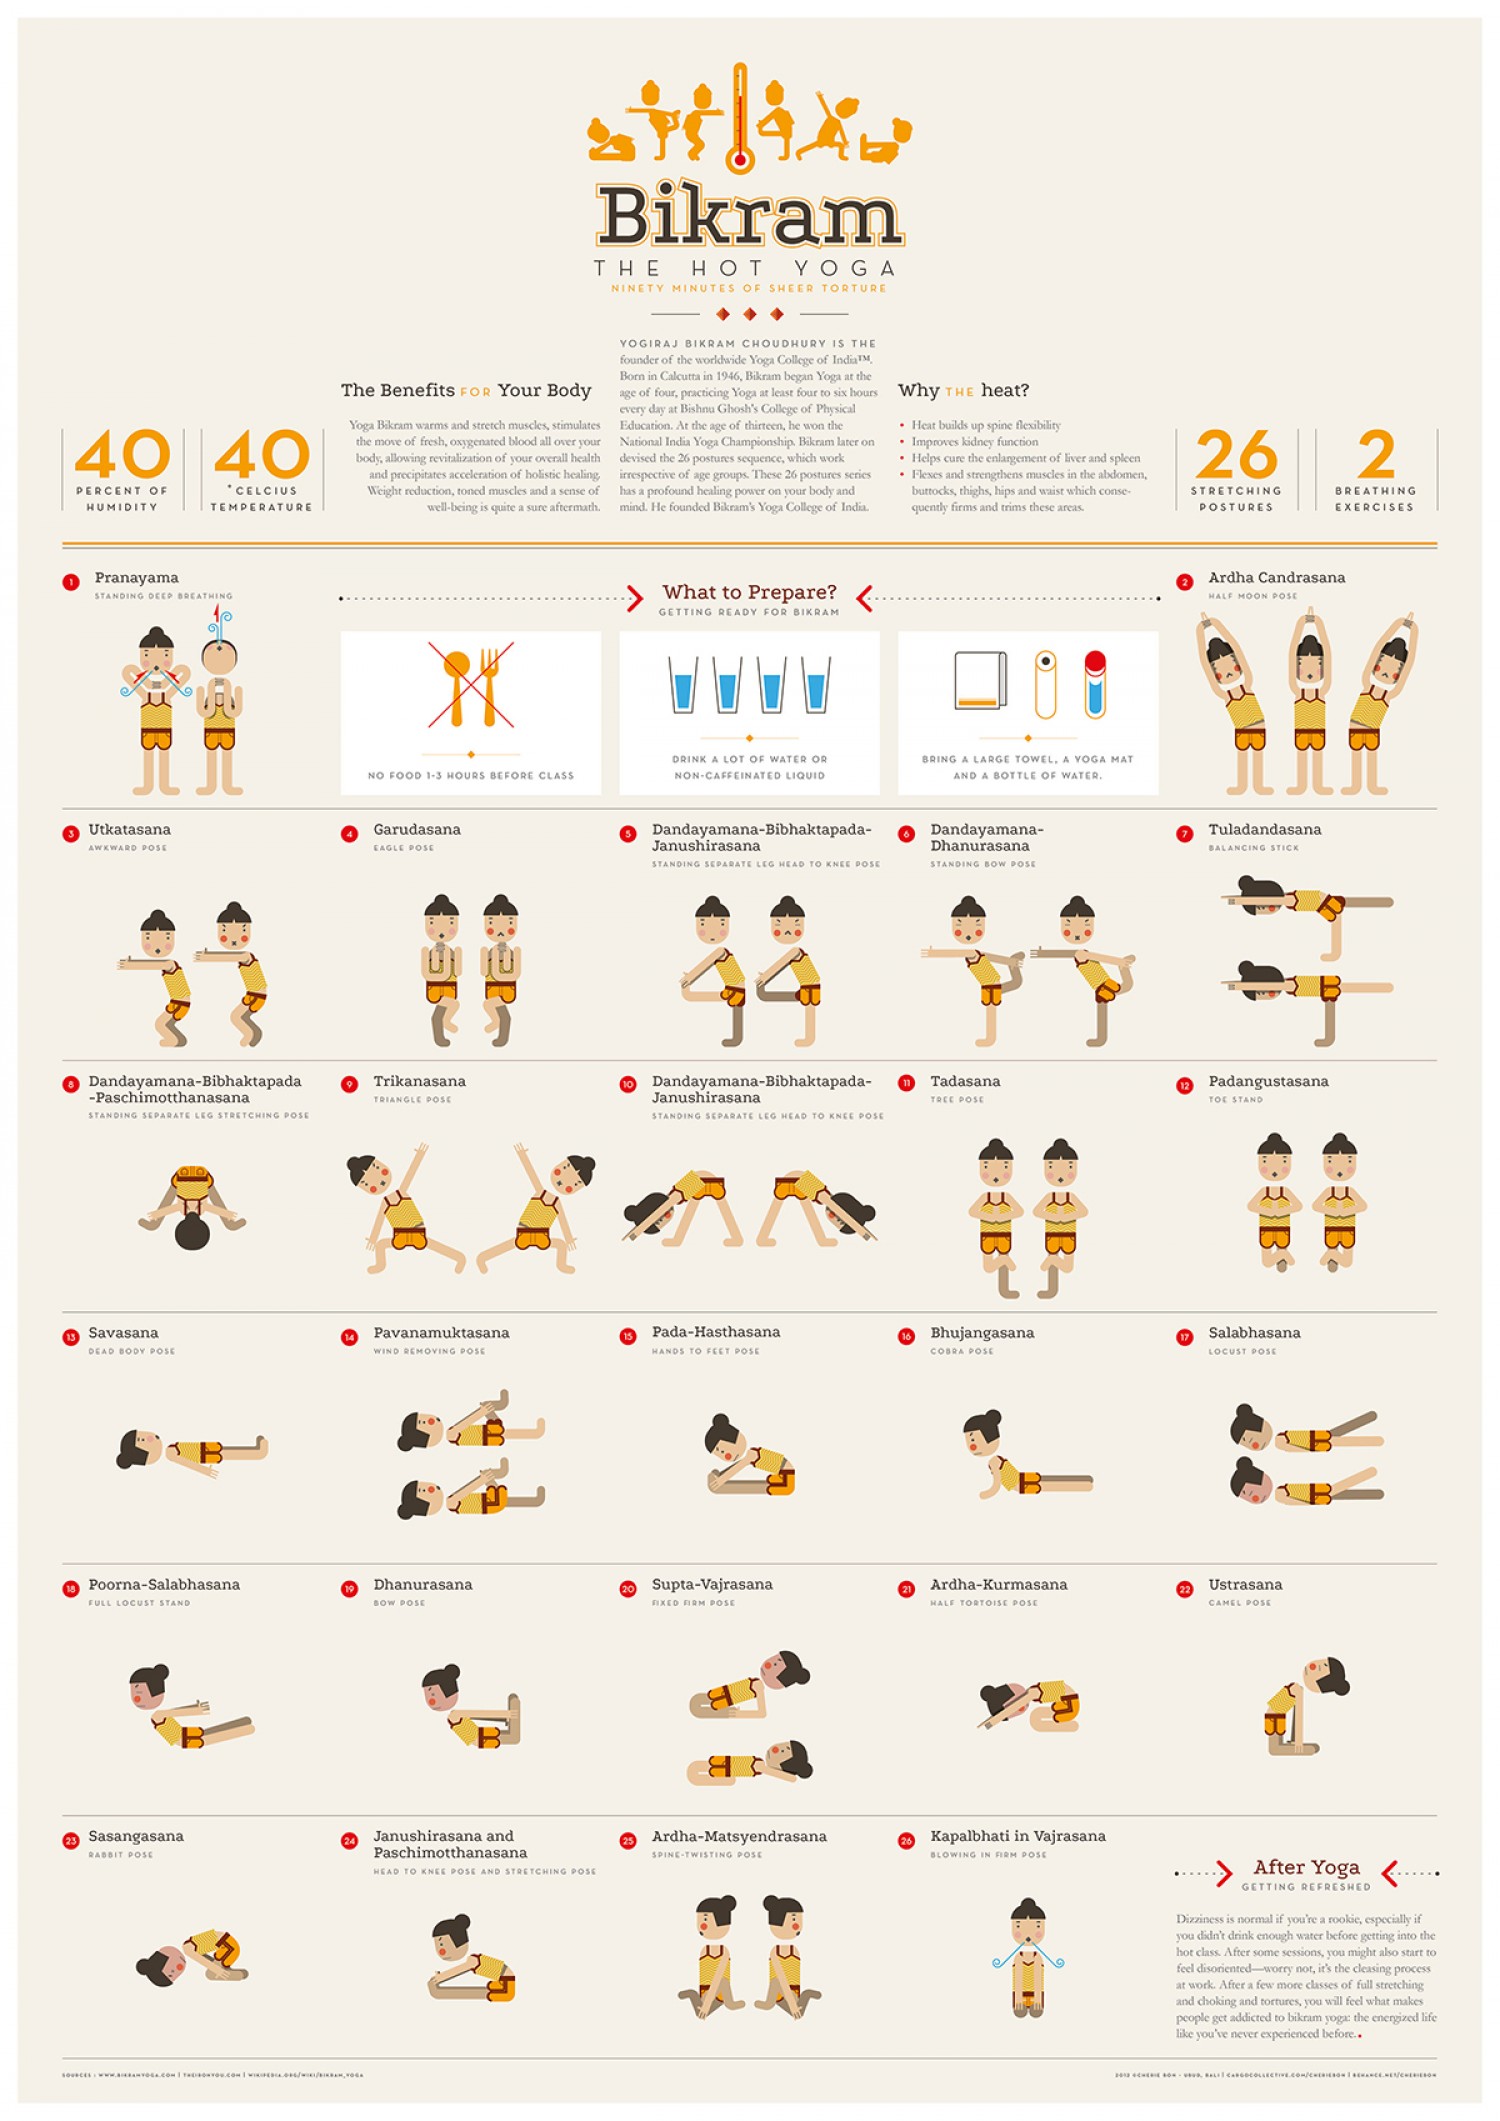 Notes from a 10 Day Bikram Challenge